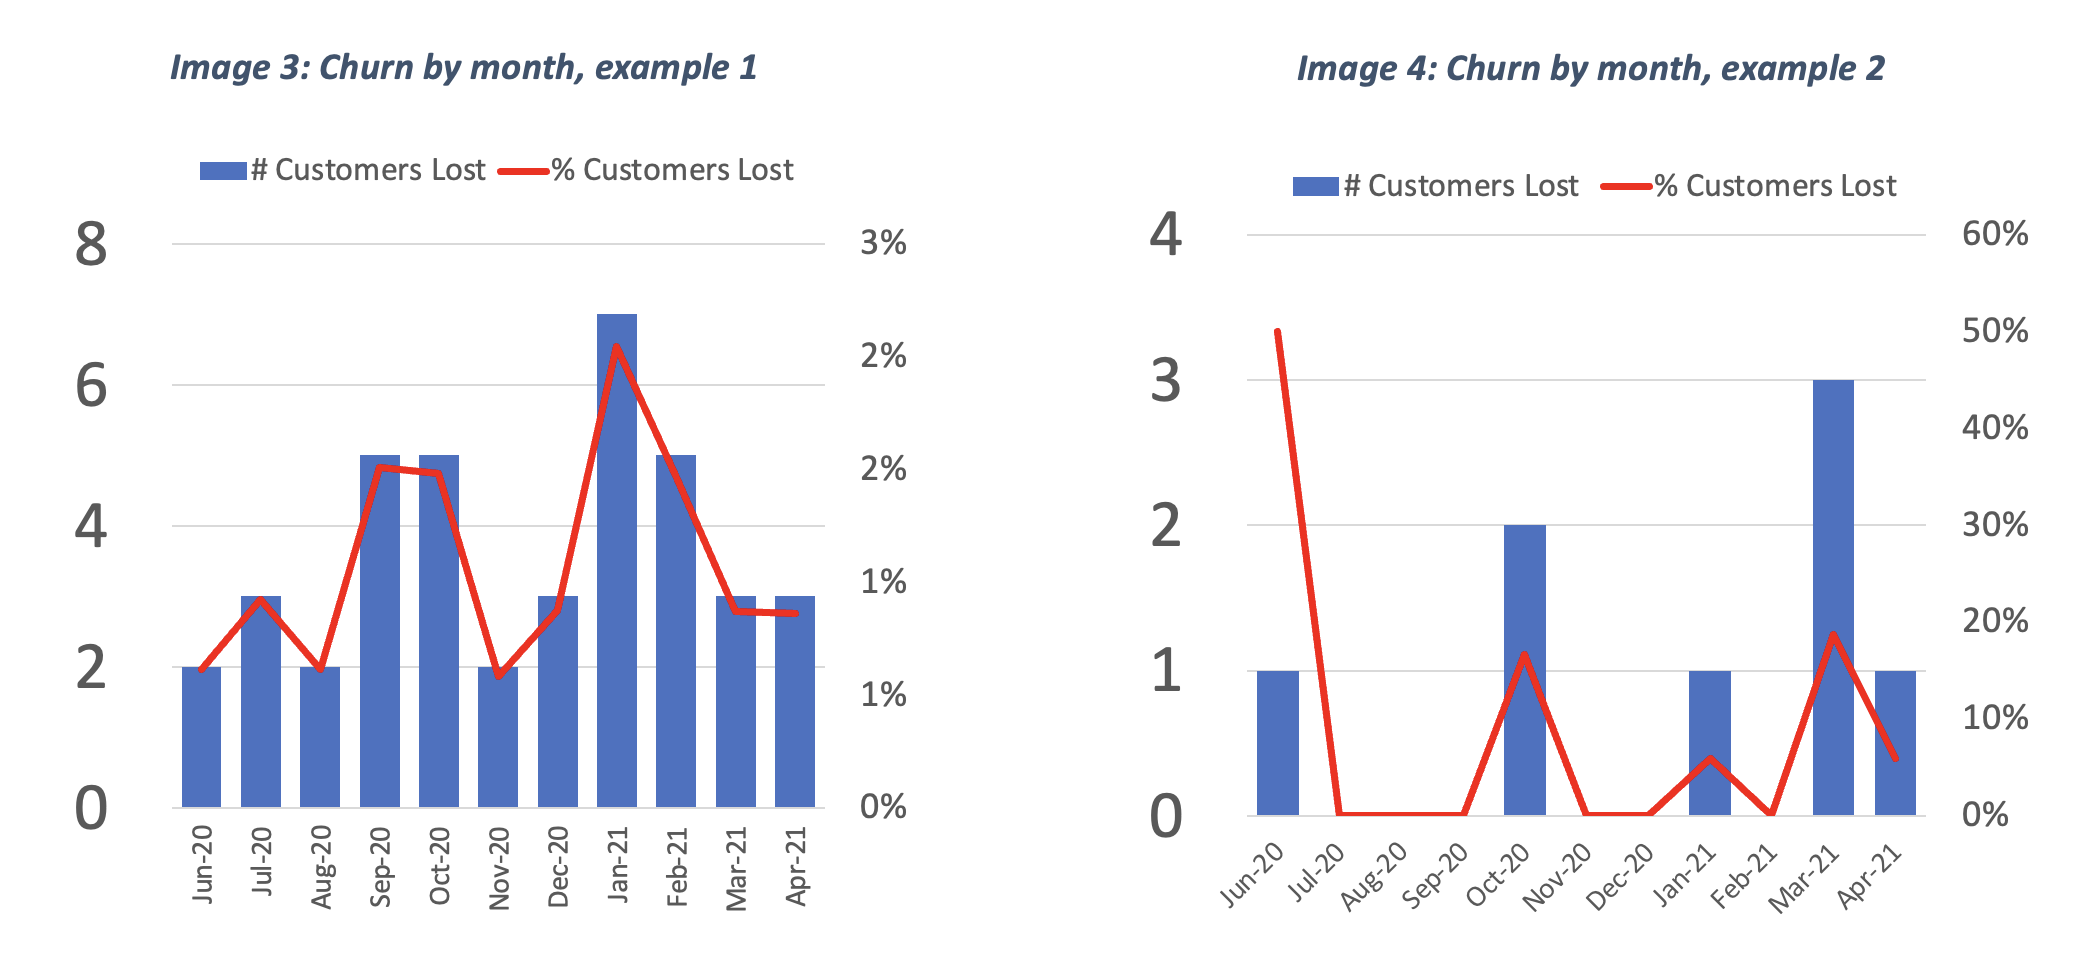 Churn by month, example bar charts 1 and 2 